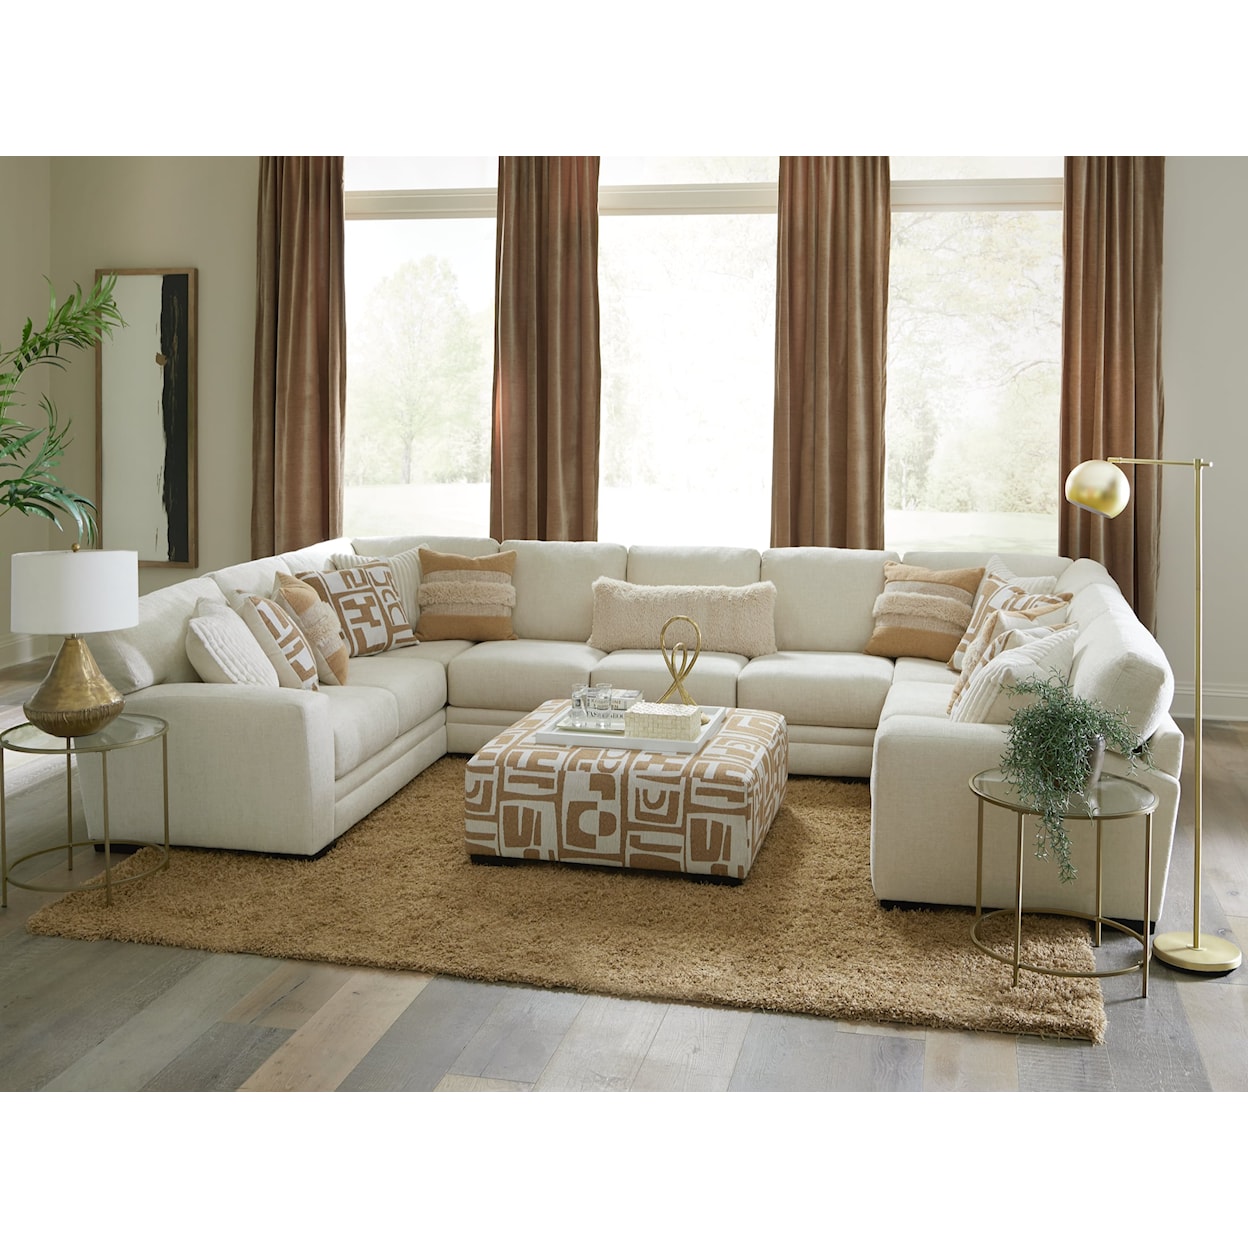 Albany 0971 Clash Natural 3 PC Sectional Sofa